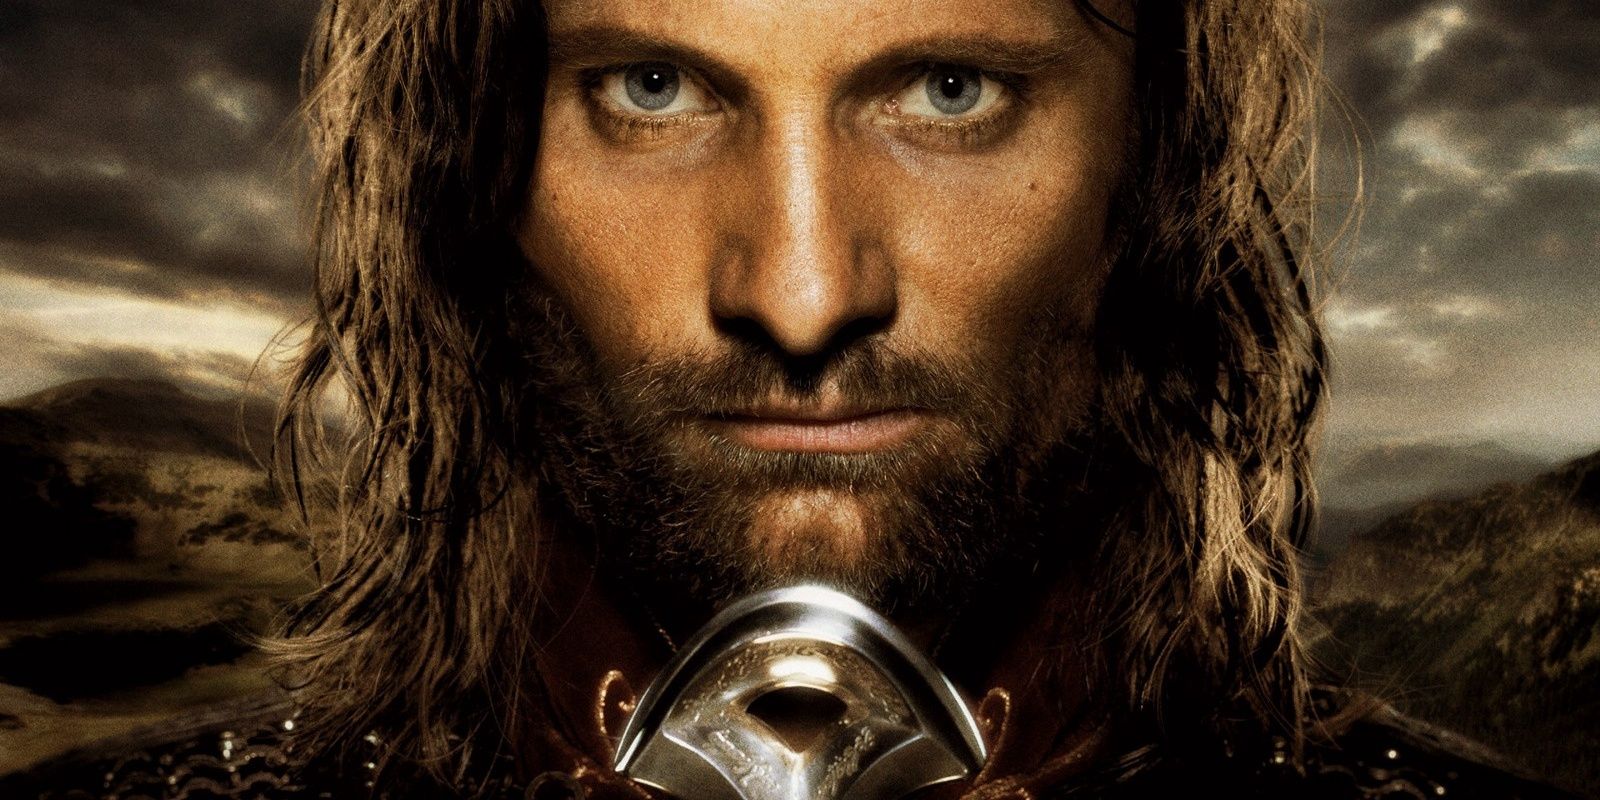  Aragorn from The Lord of the Rings